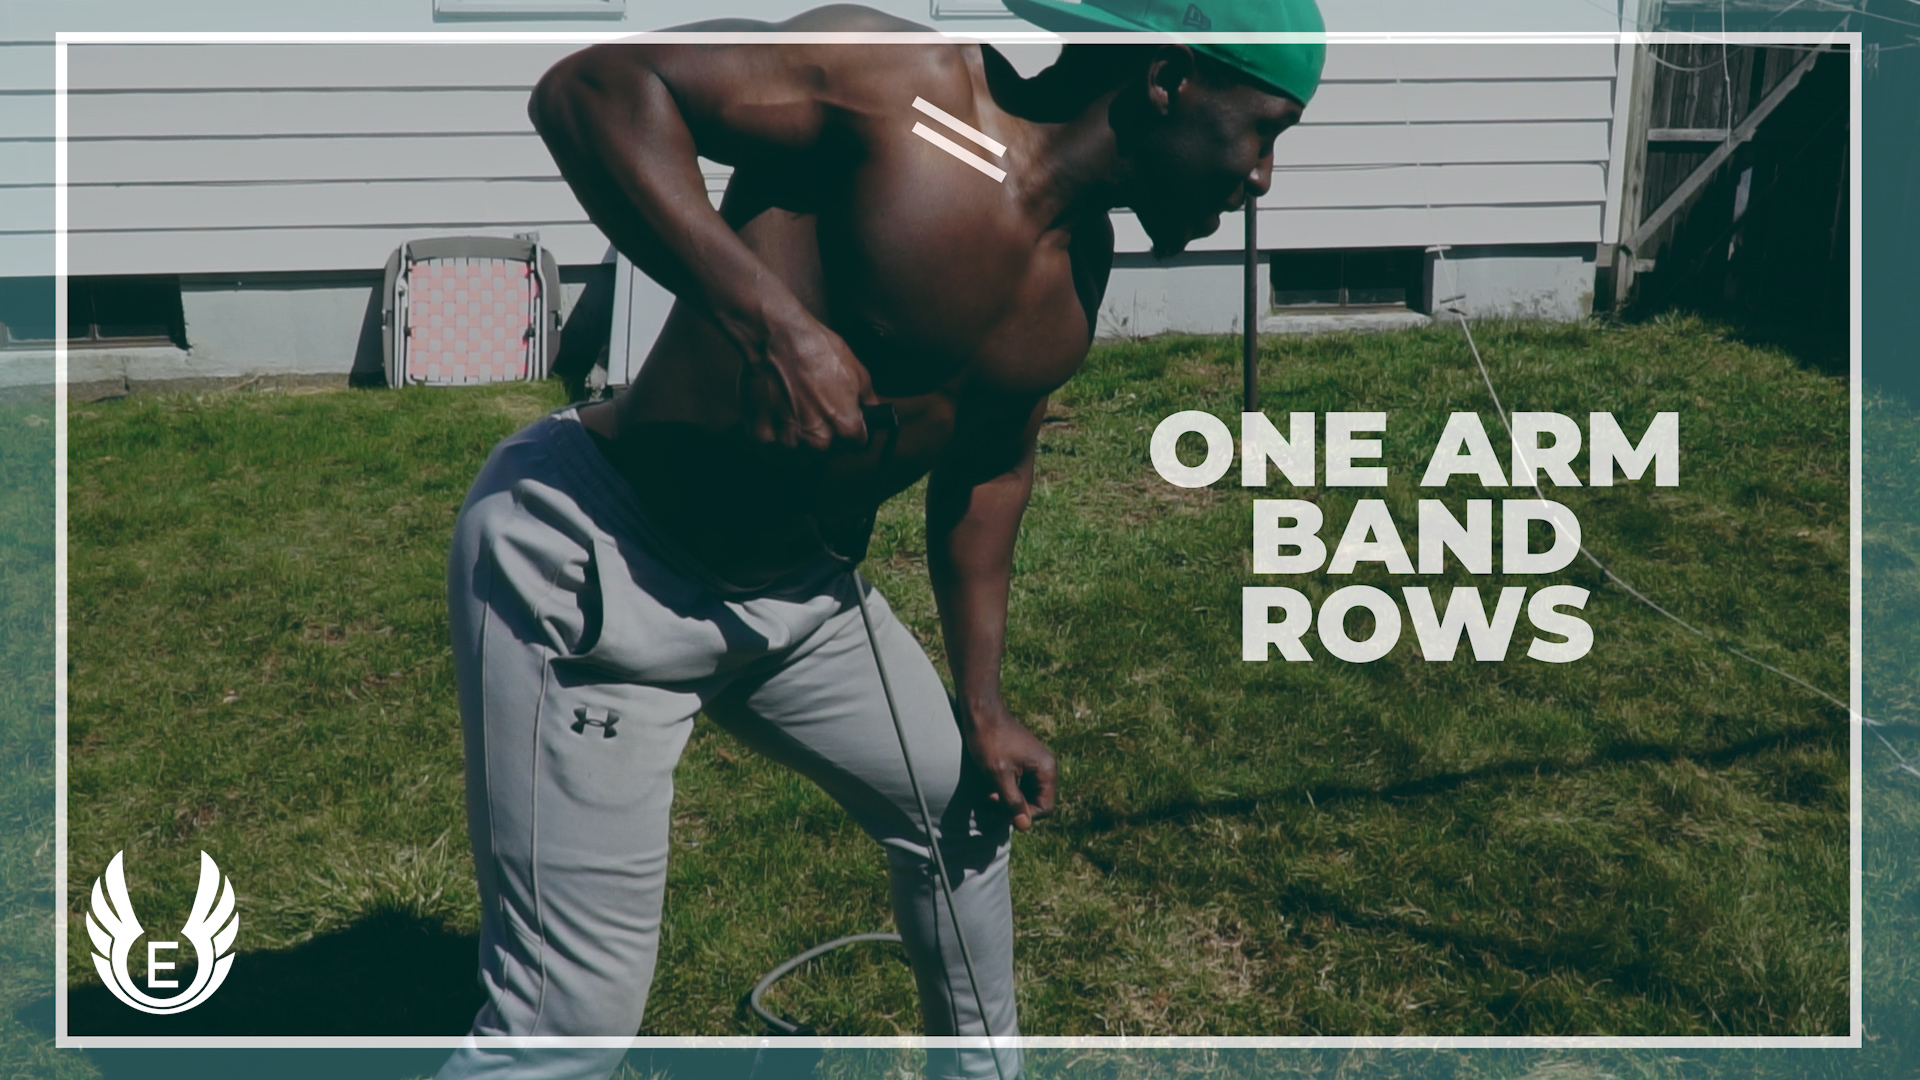 resistance band back workout one arm band rows. back workout at home with bands